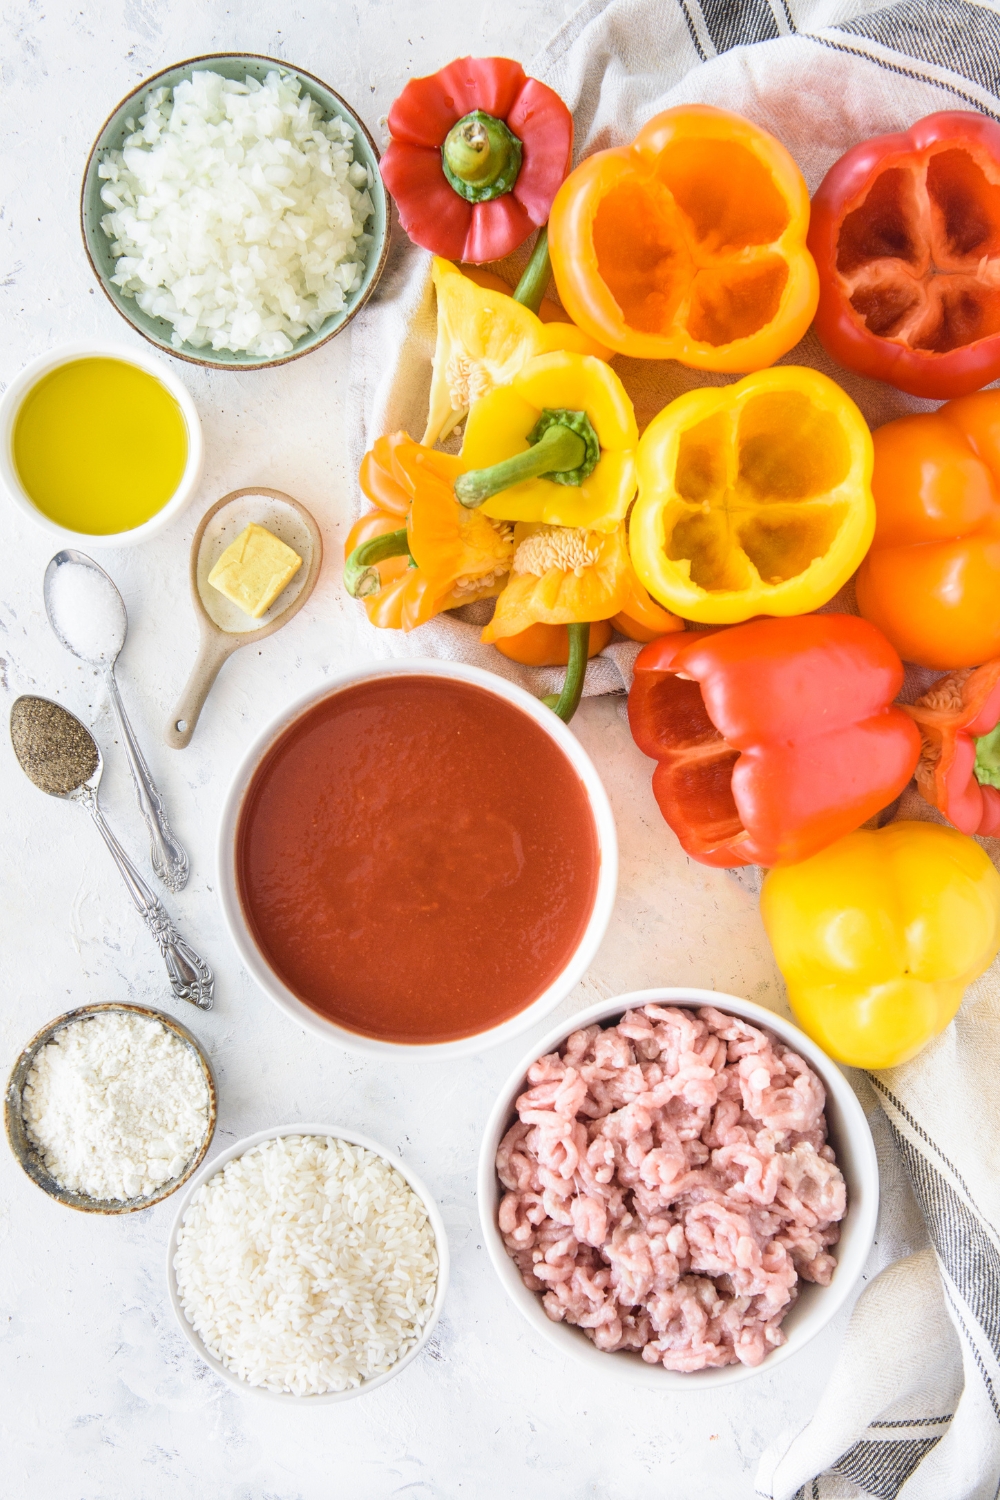 A pile of bell peppers with the seeds and stems removed next to bowls of ingredients including raw ground meat, tomato sauce, flour, oil, diced onion, and butter.